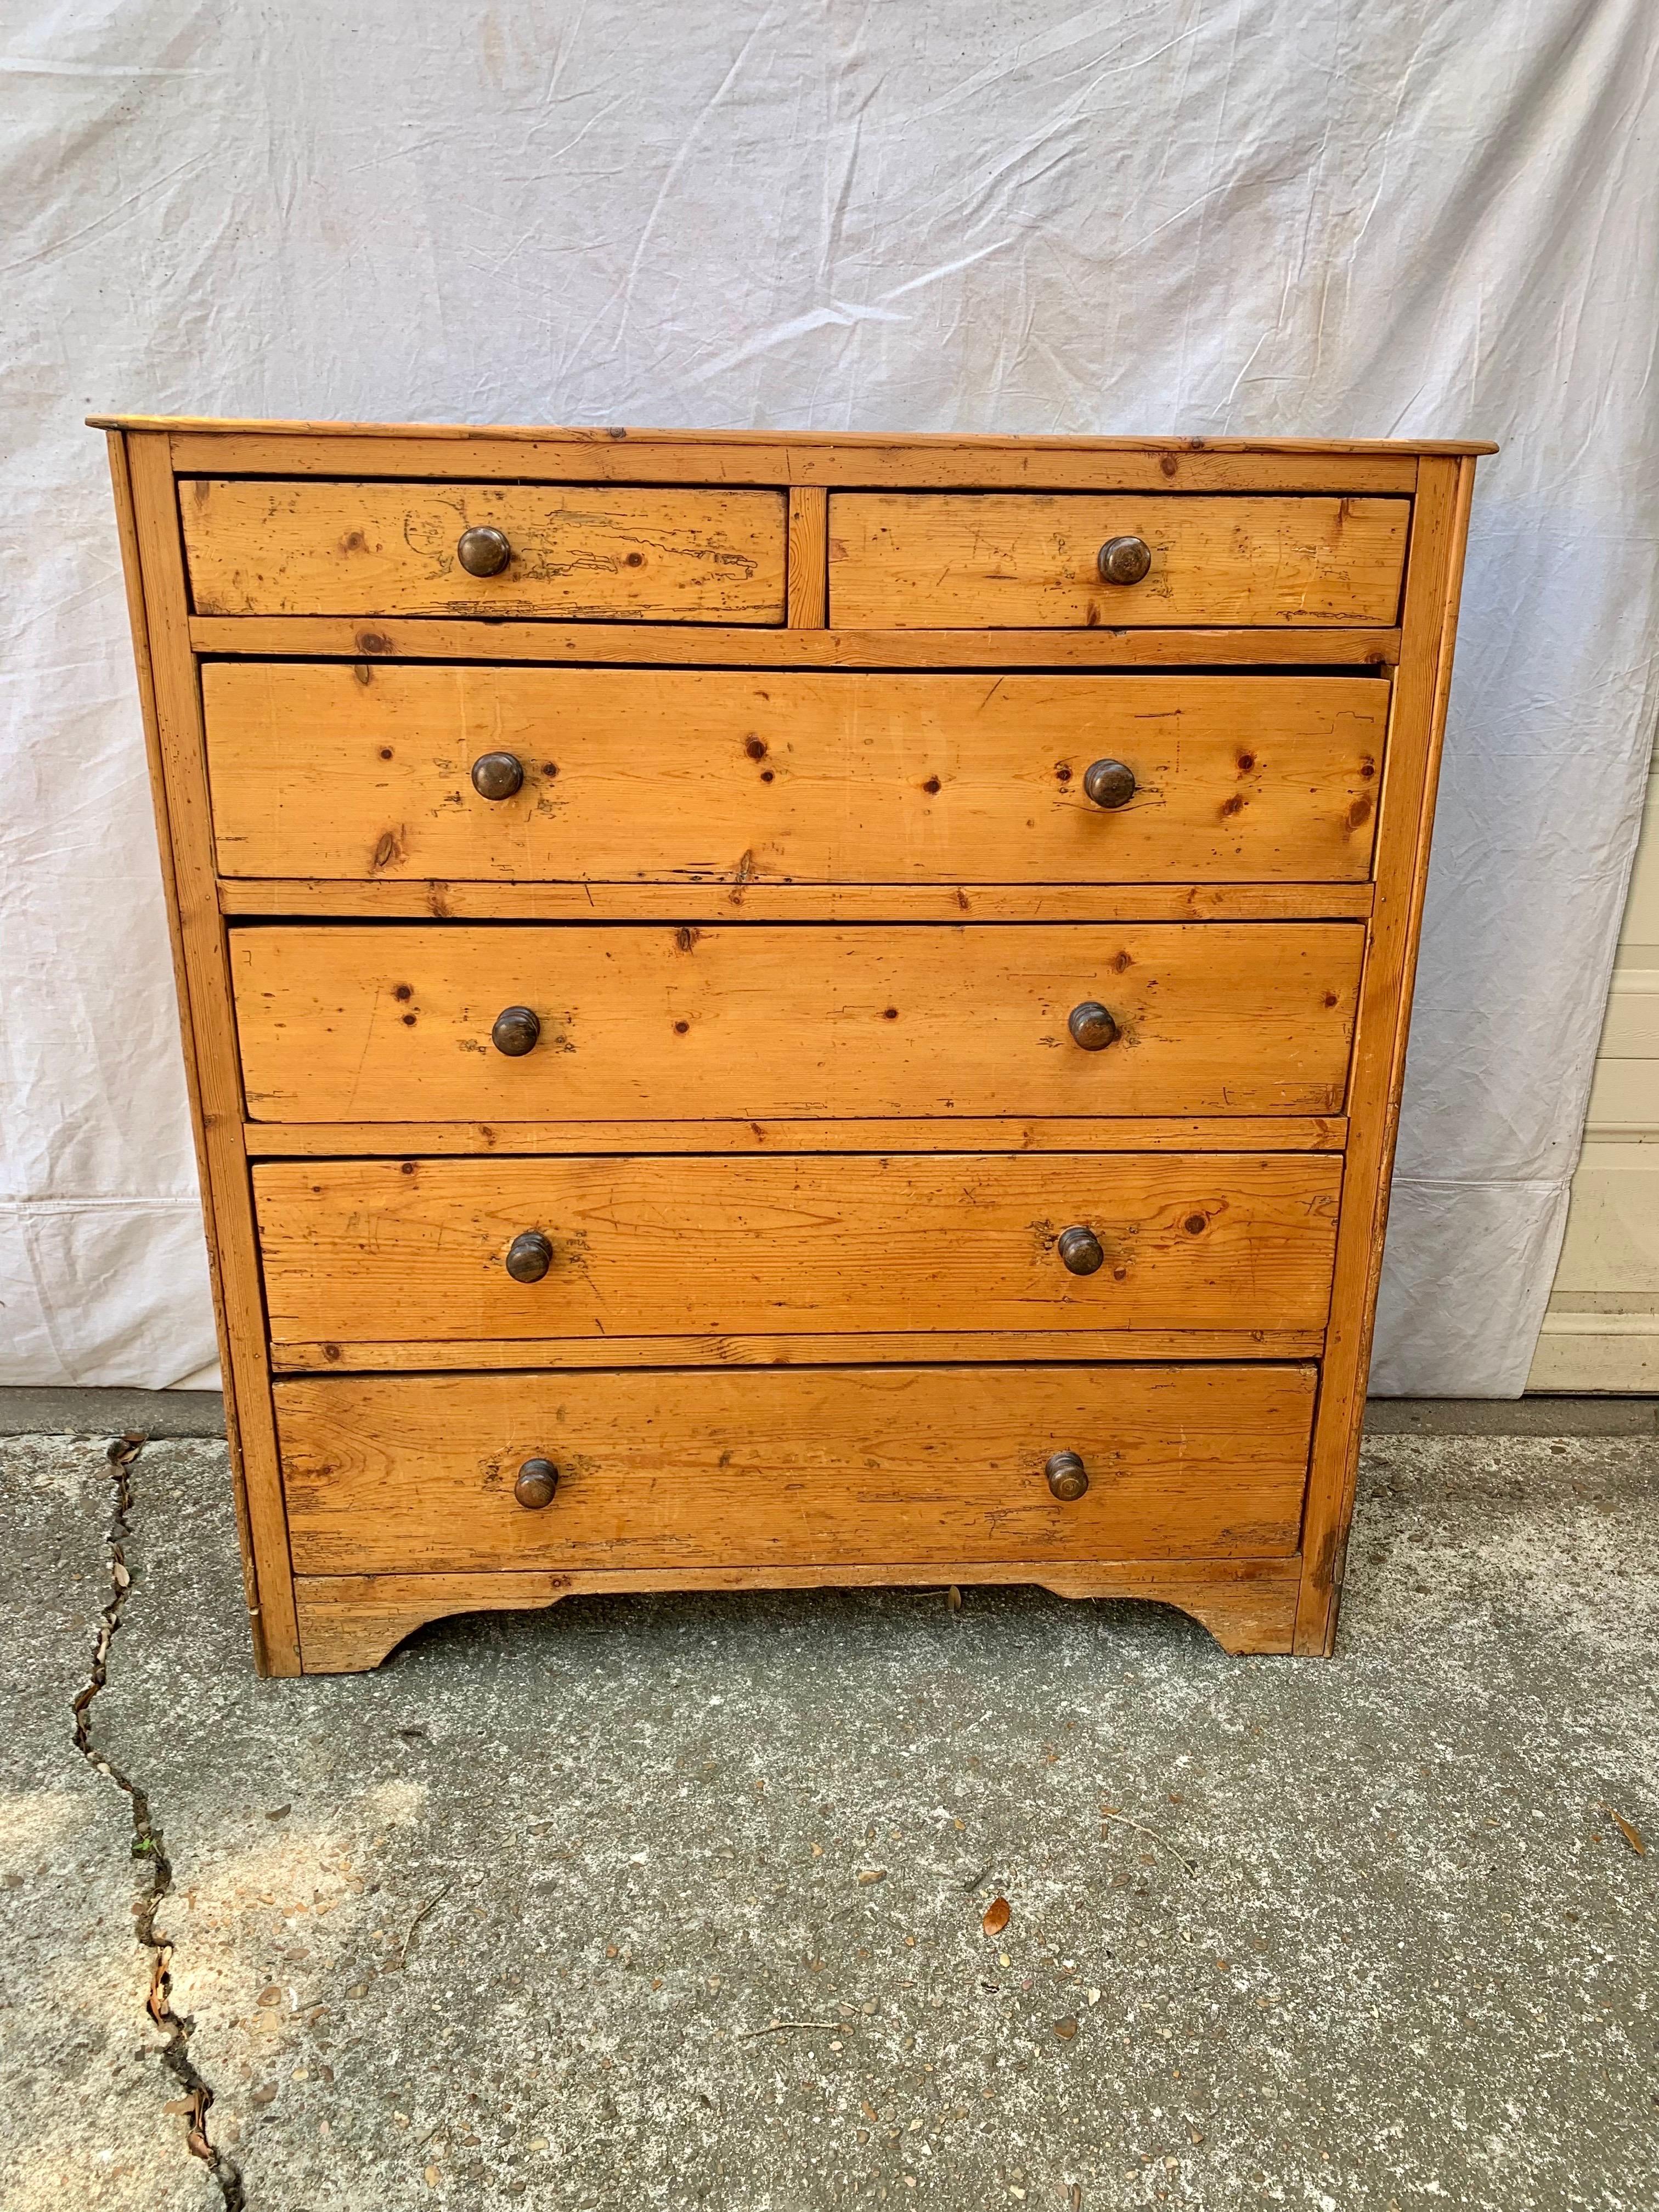 Found in England, this Chest of Drawers or Commode was crafted in the Mid 19th Century by English artisans from old growth Pine. Constructed with a two plank top resting above six drawers, 2 smaller at the top and four lower, the piece provides